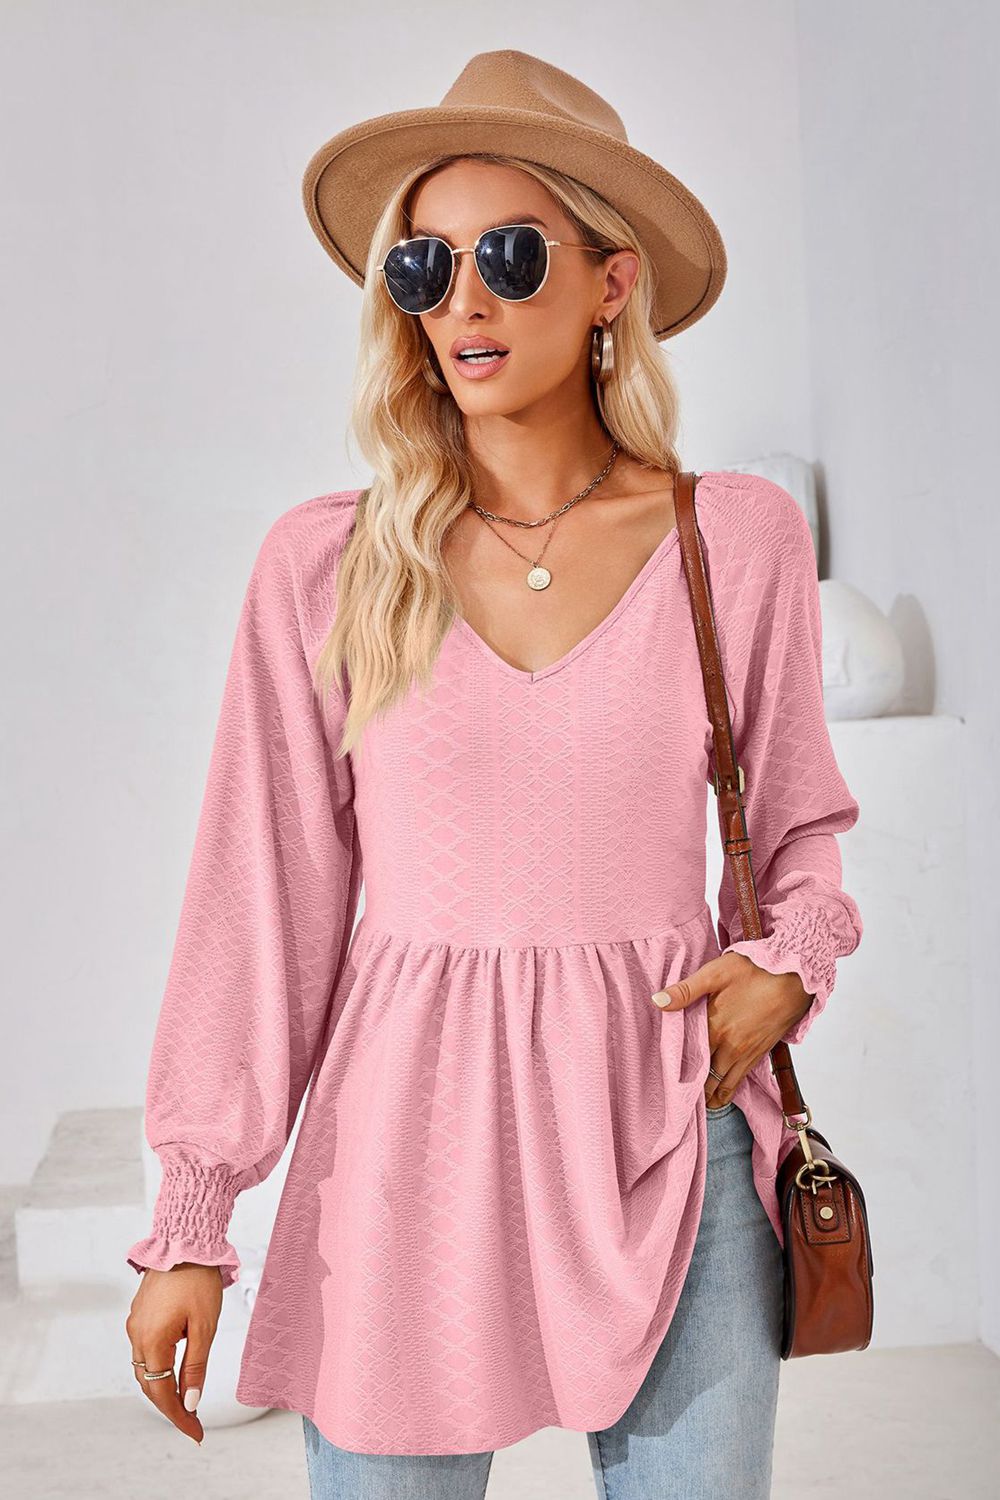 V-Neck Lantern Sleeve Blouse - Light Pink / S - Women’s Clothing & Accessories - Shirts & Tops - 22 - 2024